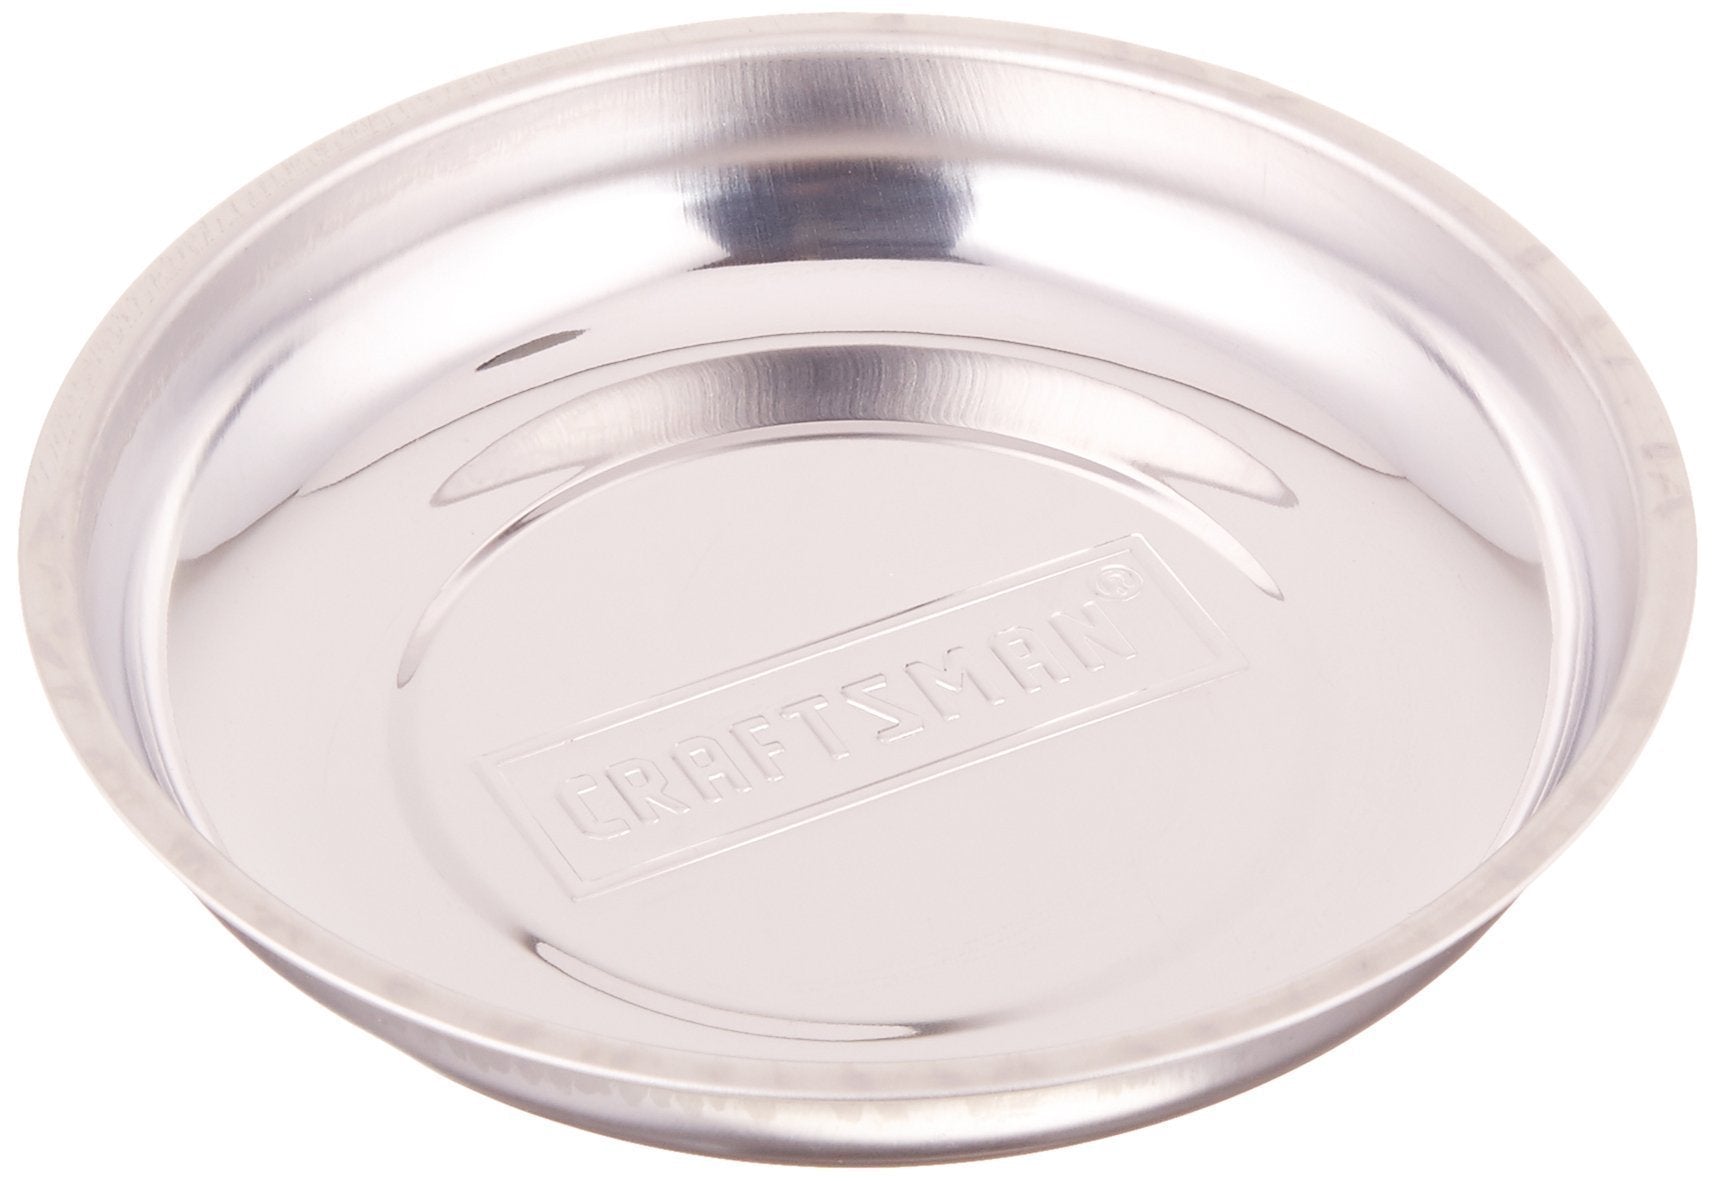 Heavy duty craftsman magnetic stainless steel bowl 6 9 41328